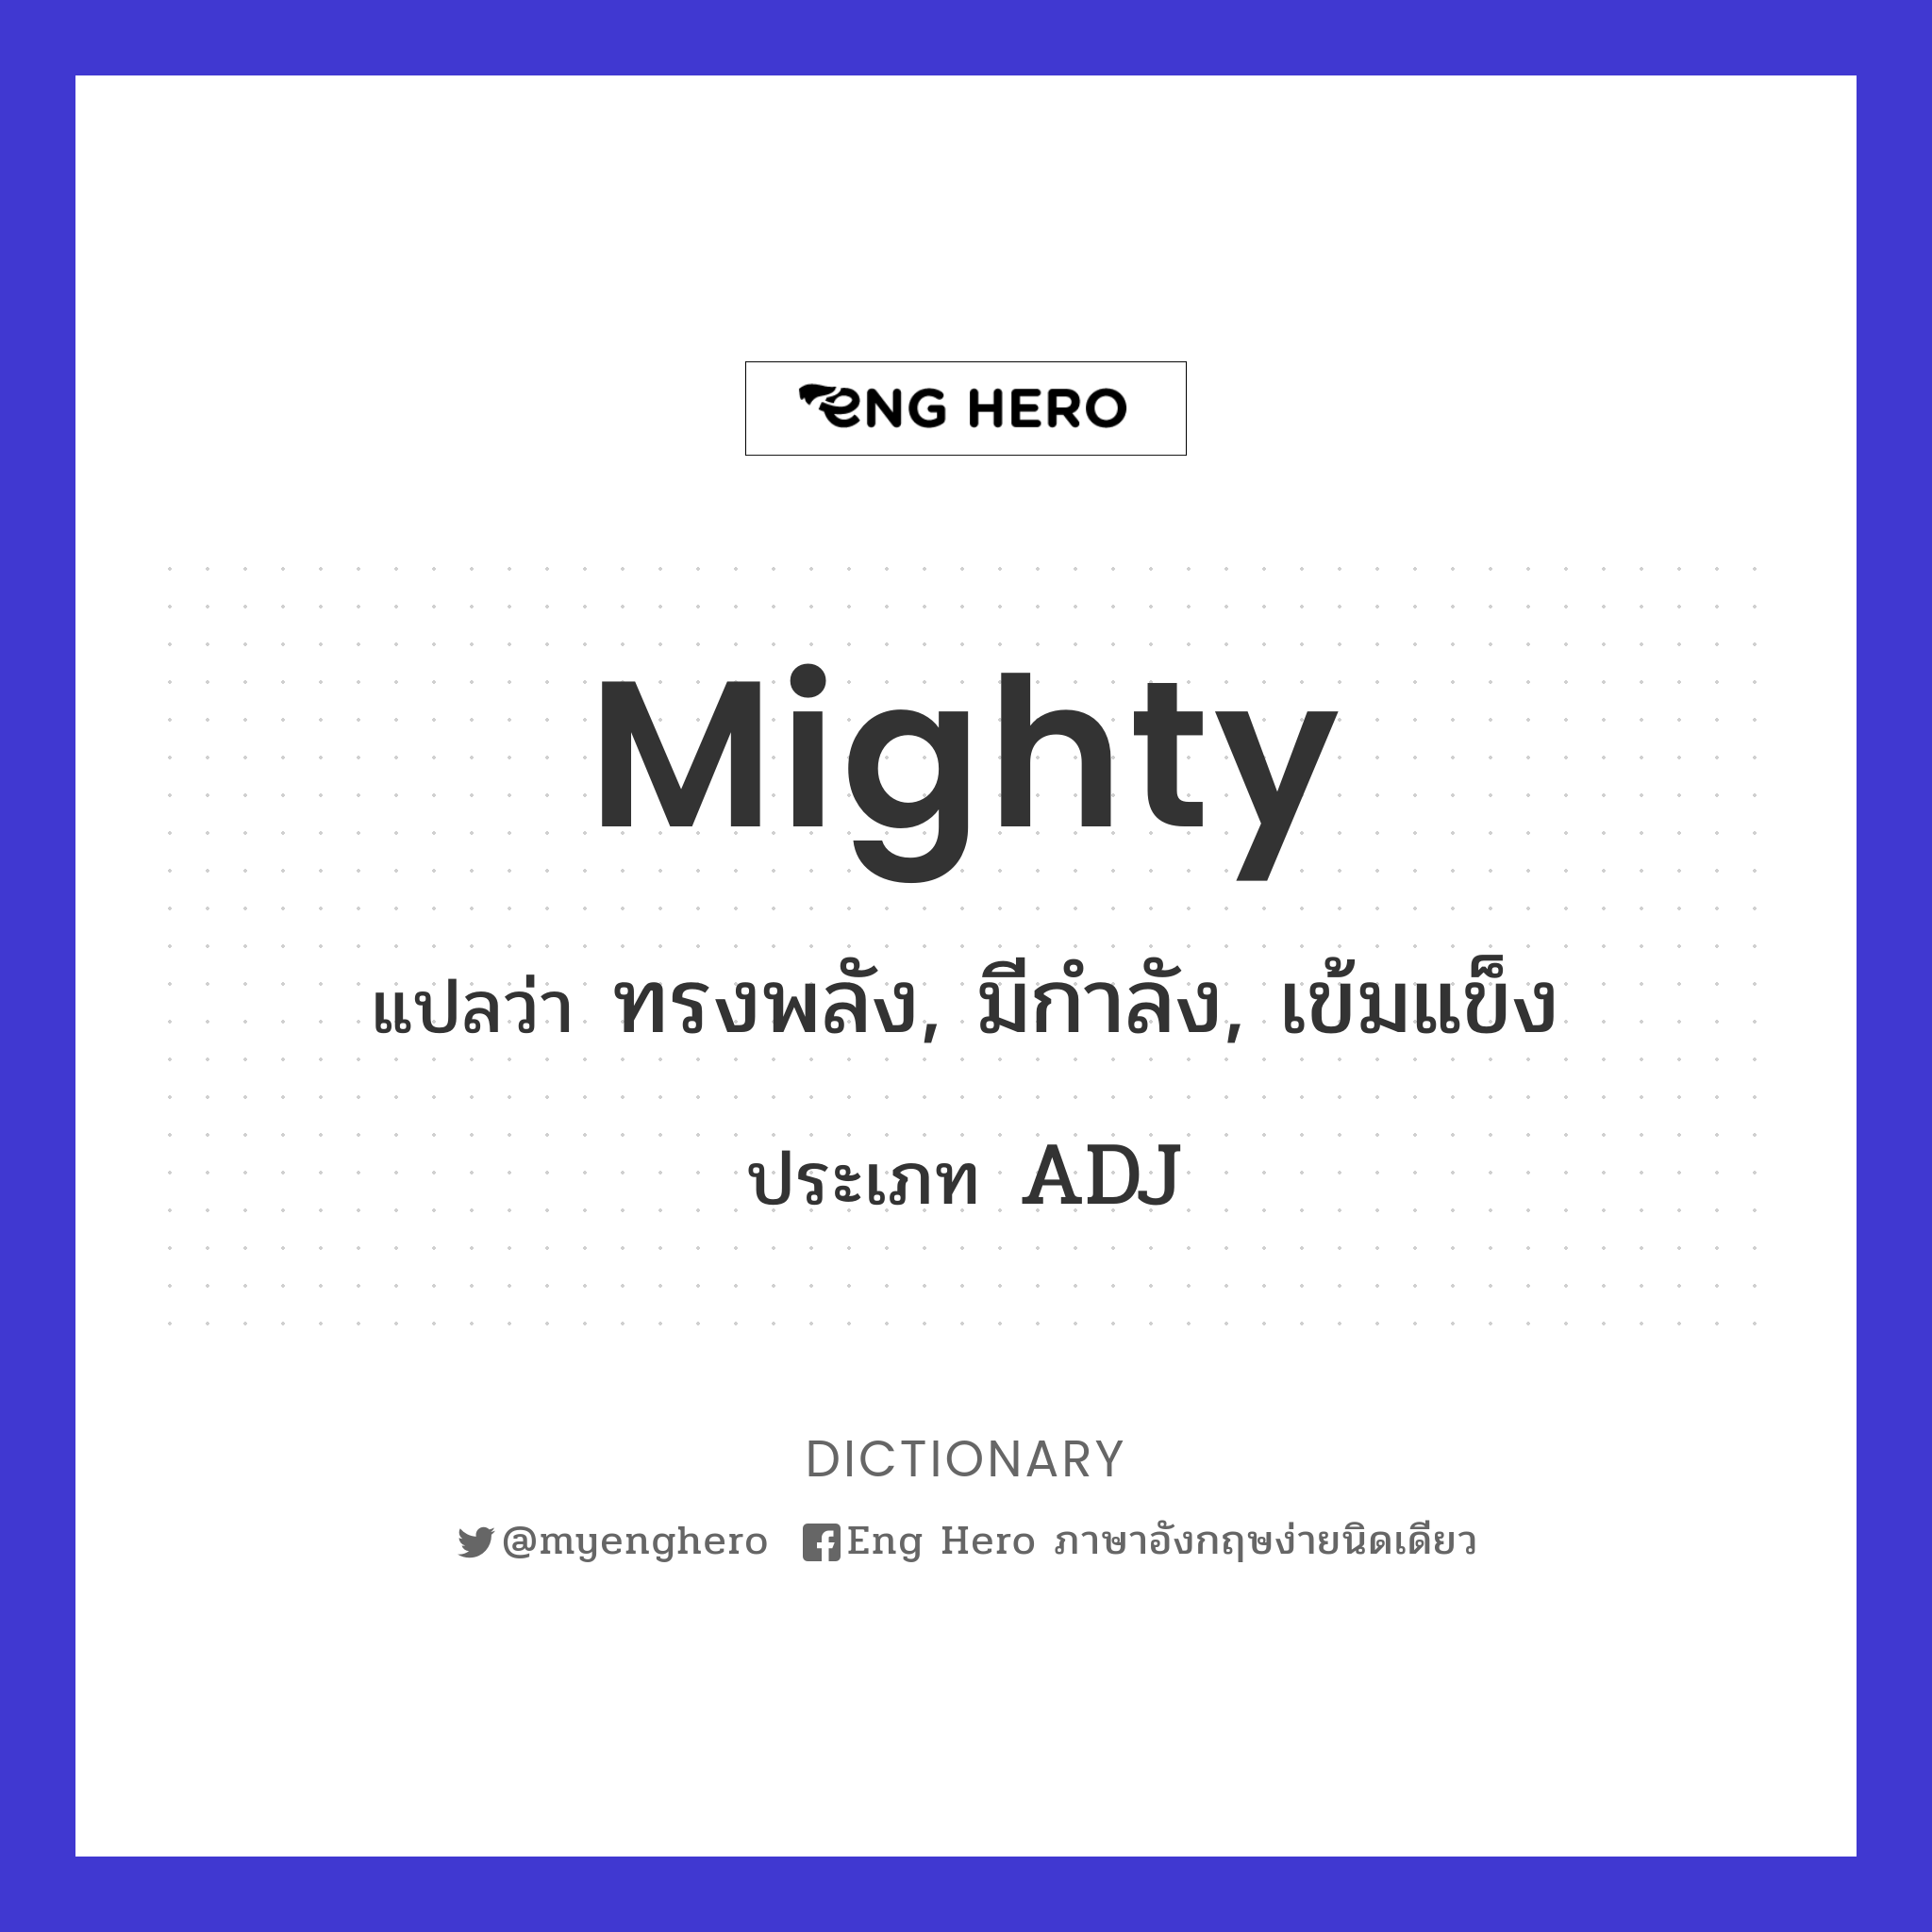 mighty